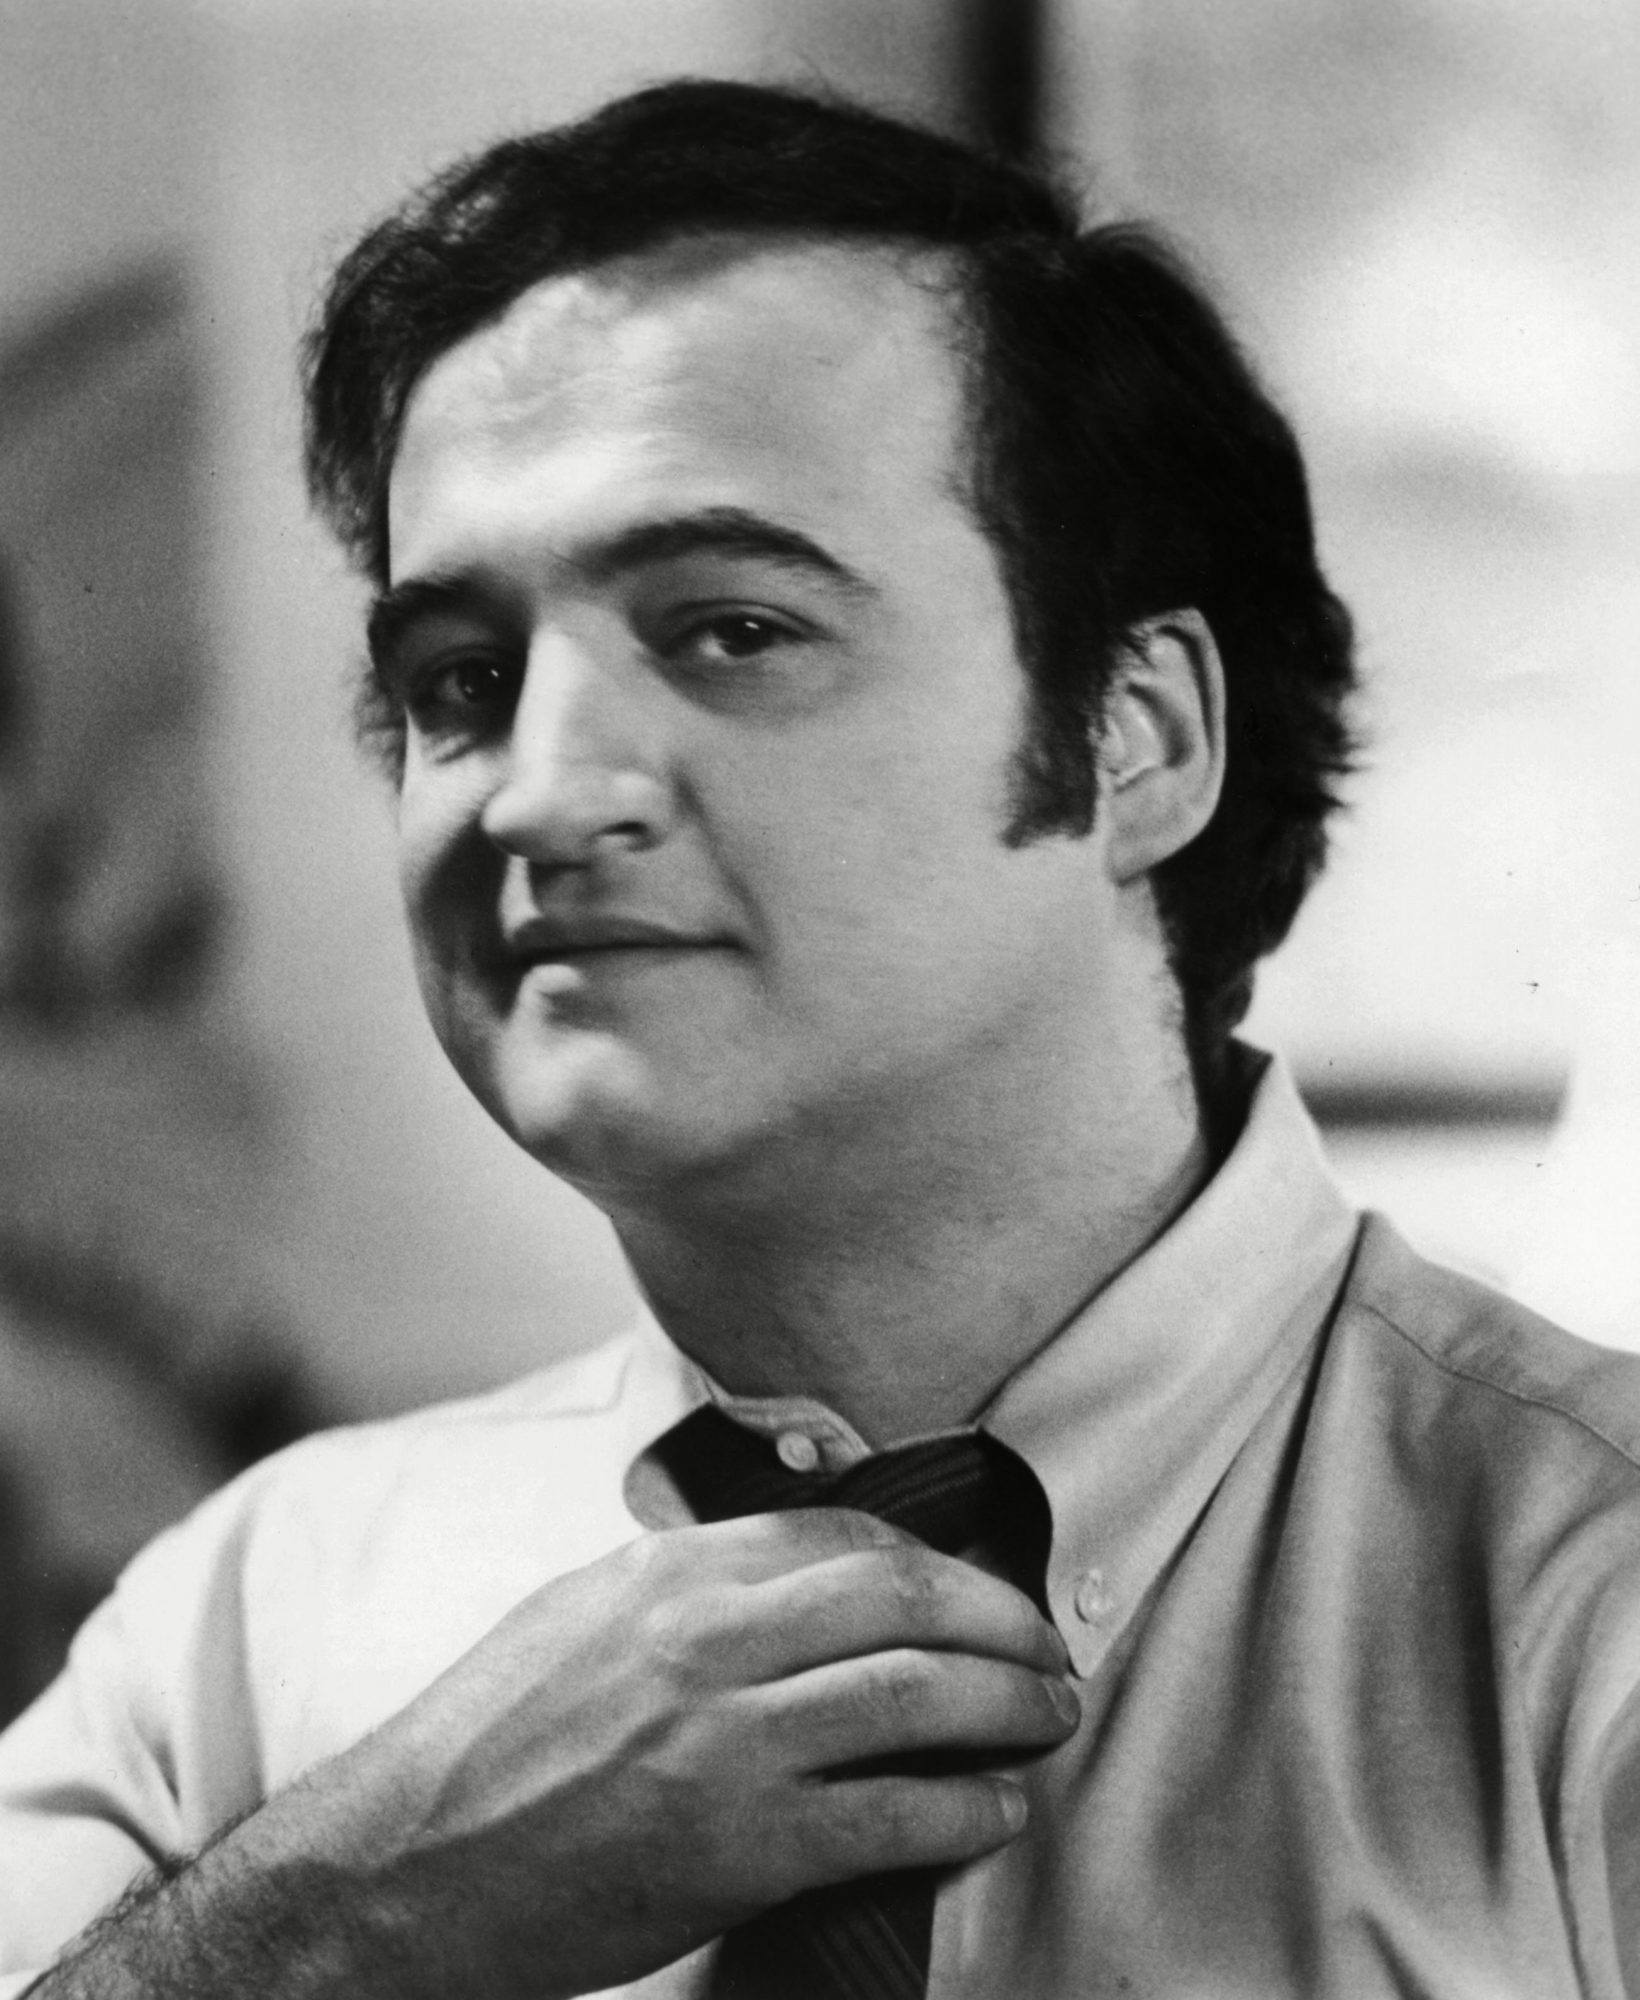 Happy Birthday to the late John Belushi who would\ve turned 73 today. 